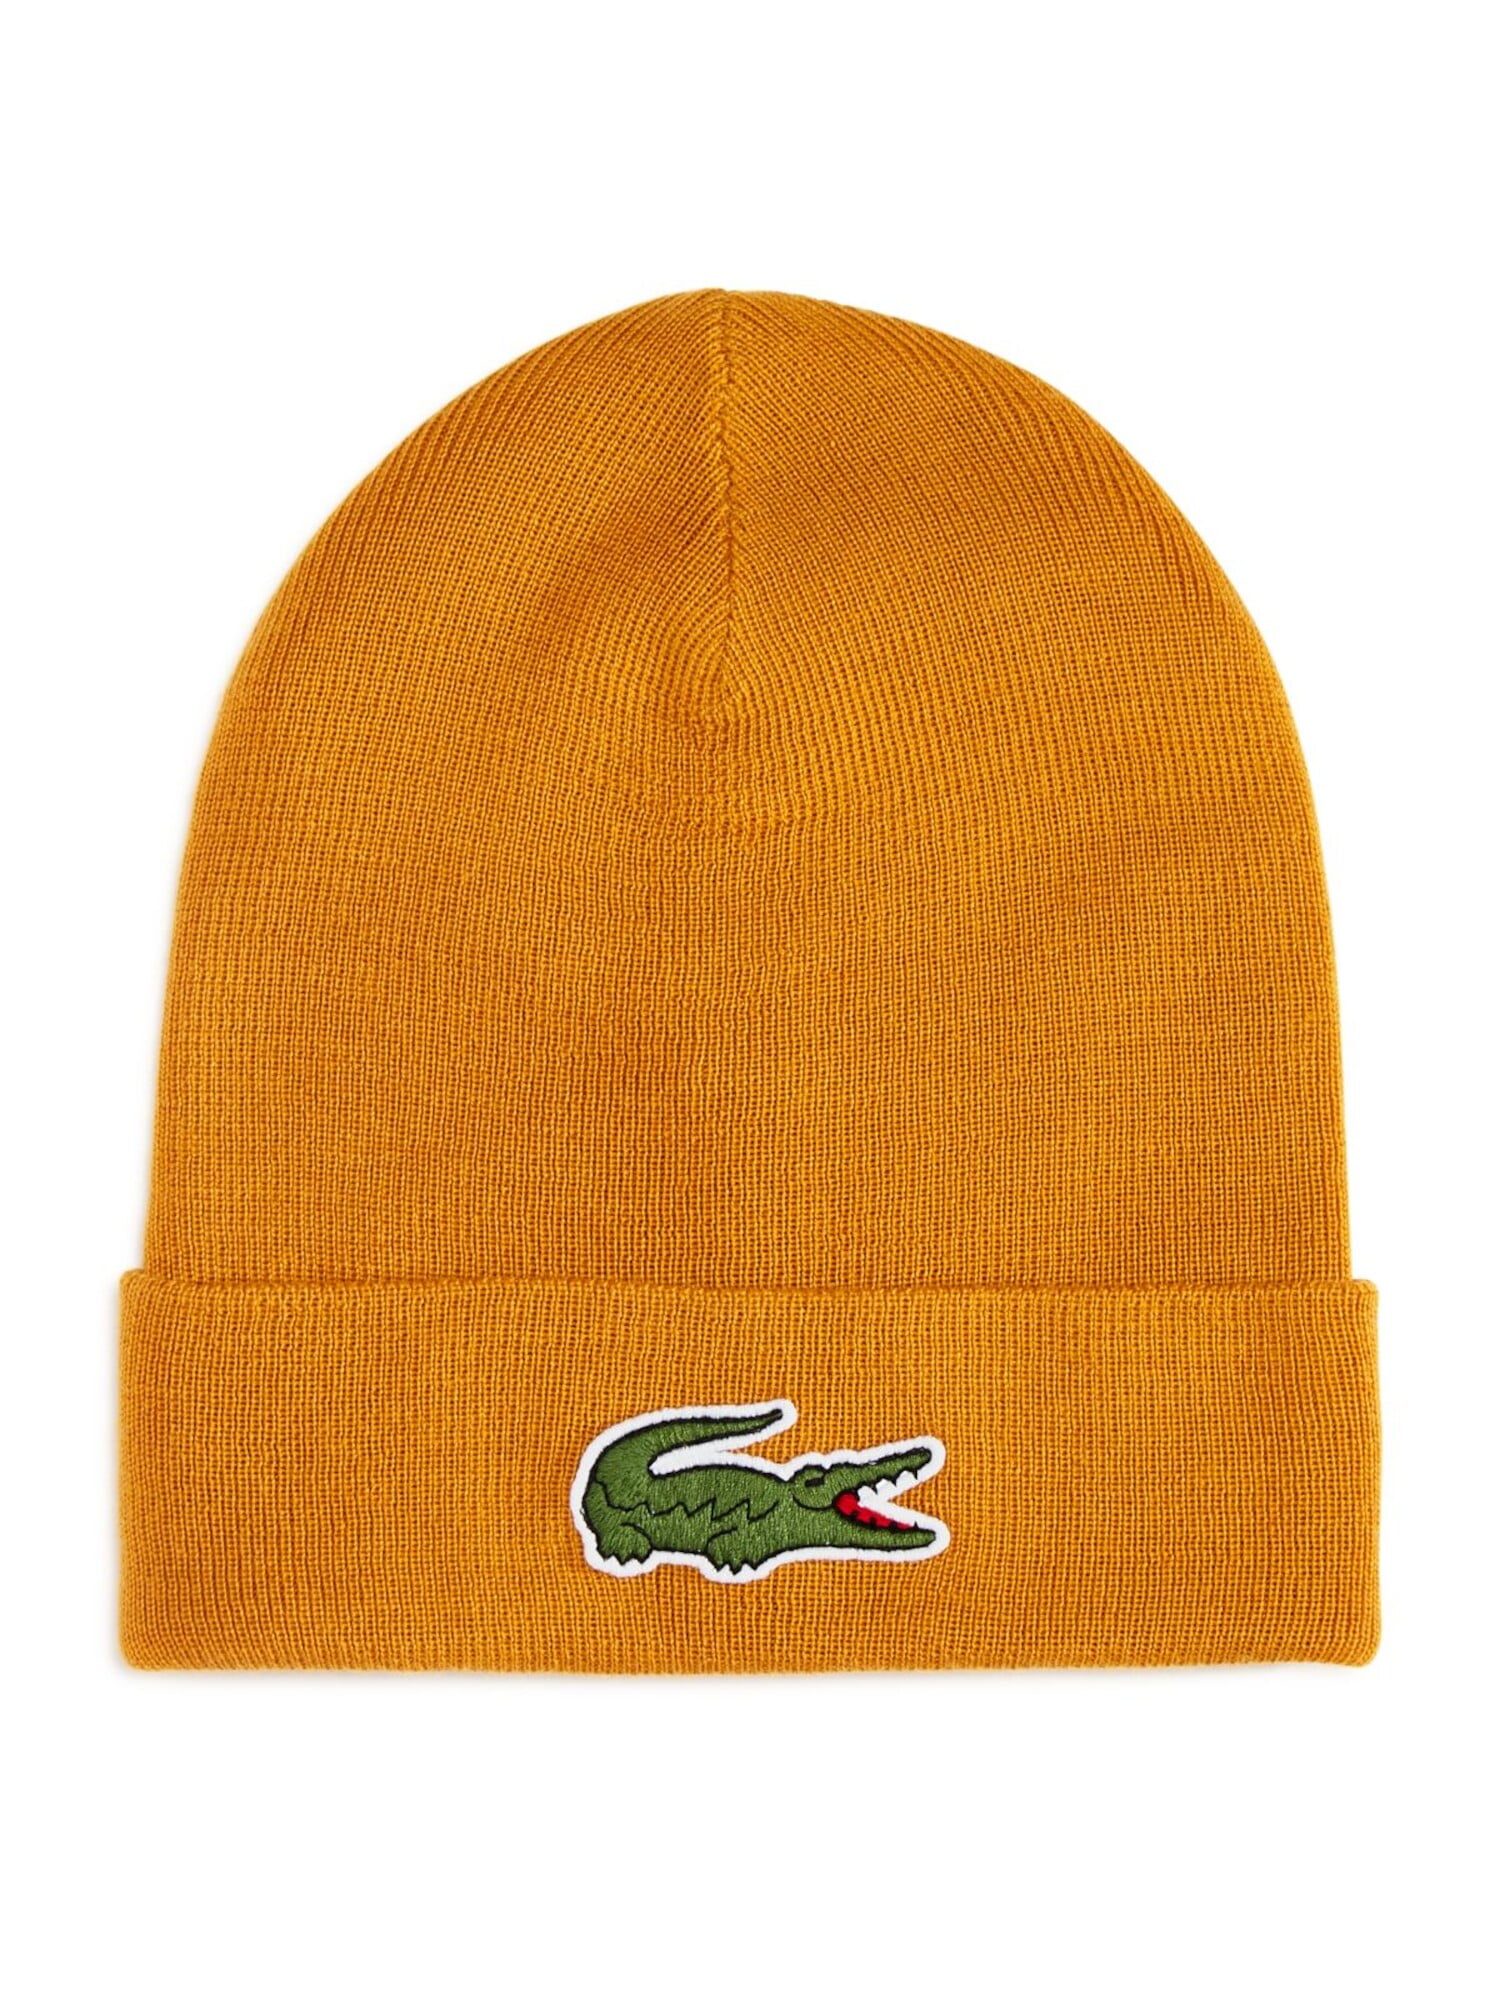 LACOSTE Mens Orange Logo Cotton Fitted Wool Blend Embroidered Beanie Hat Cap - Walmart.com